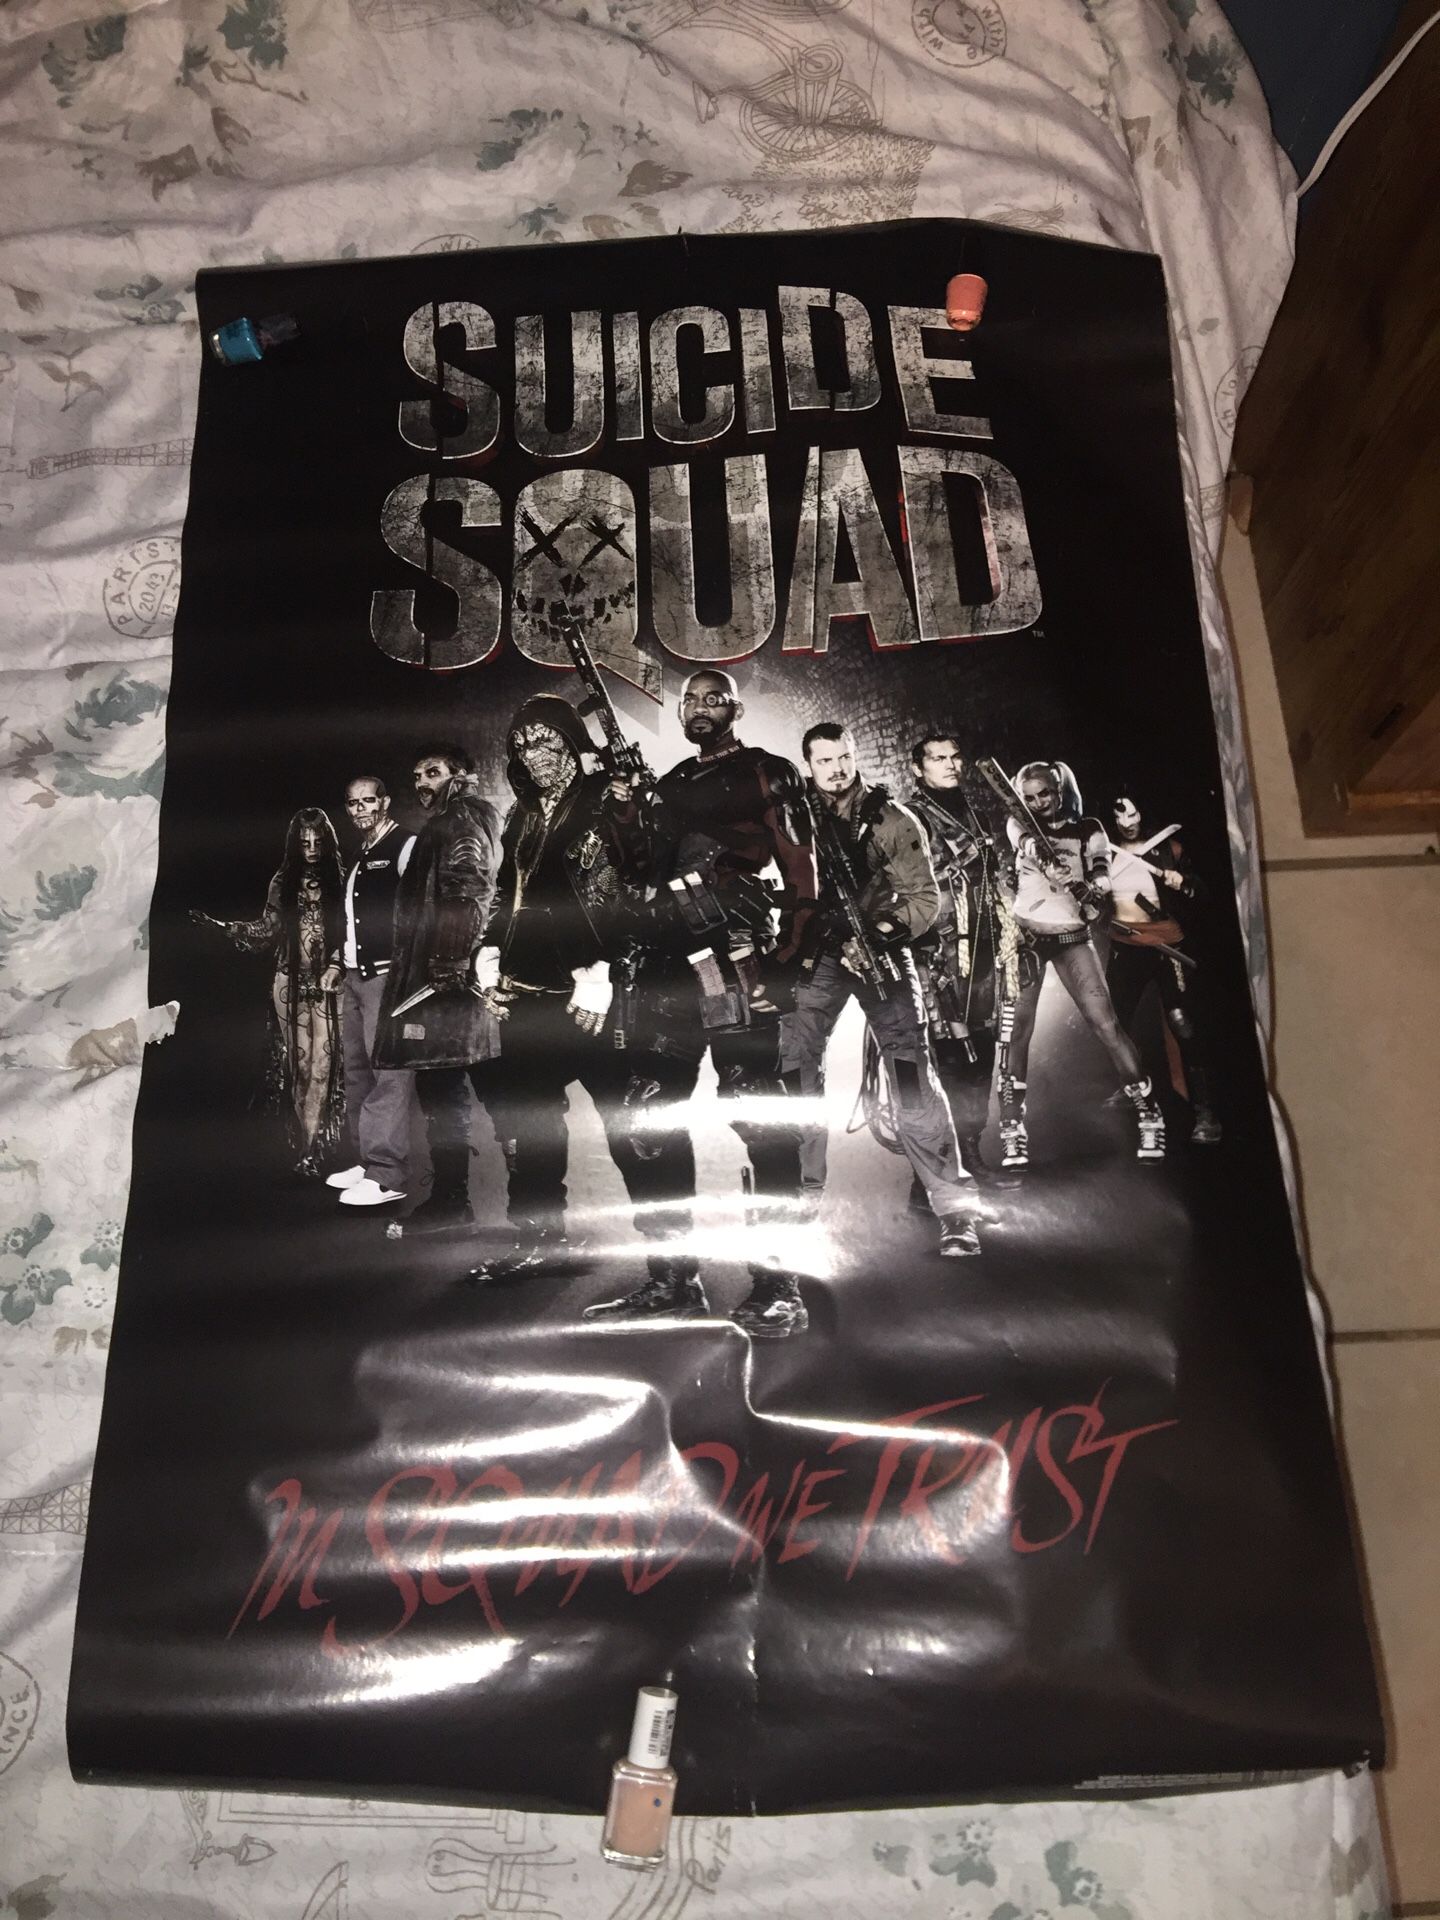 Suicide squad posters $4 for all